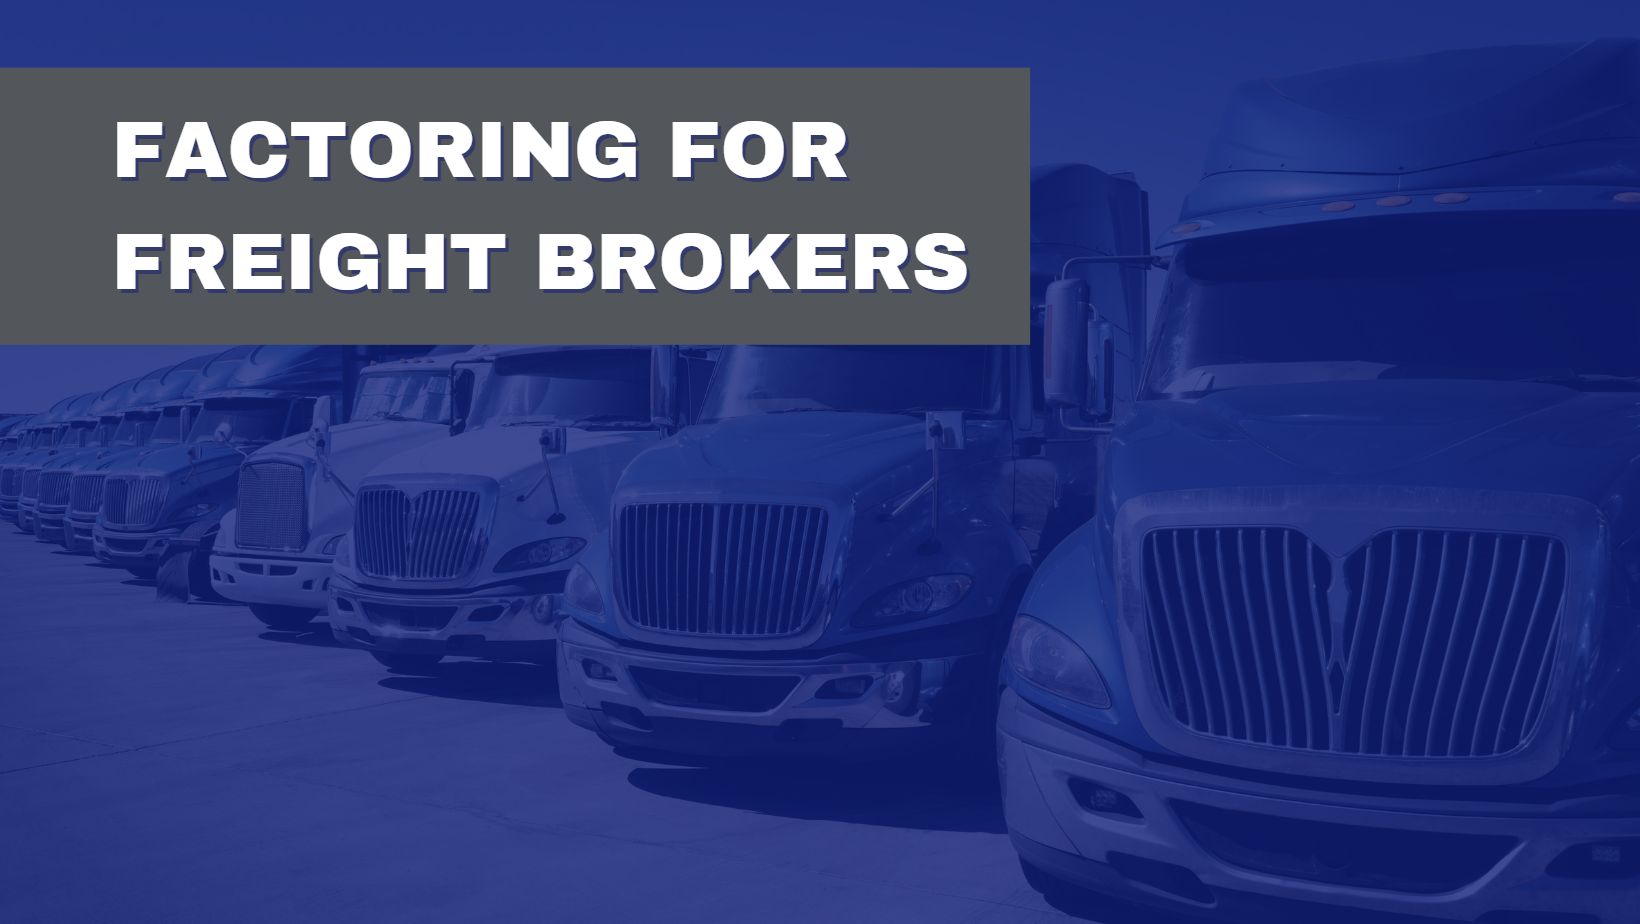 Factoring for freight brokers